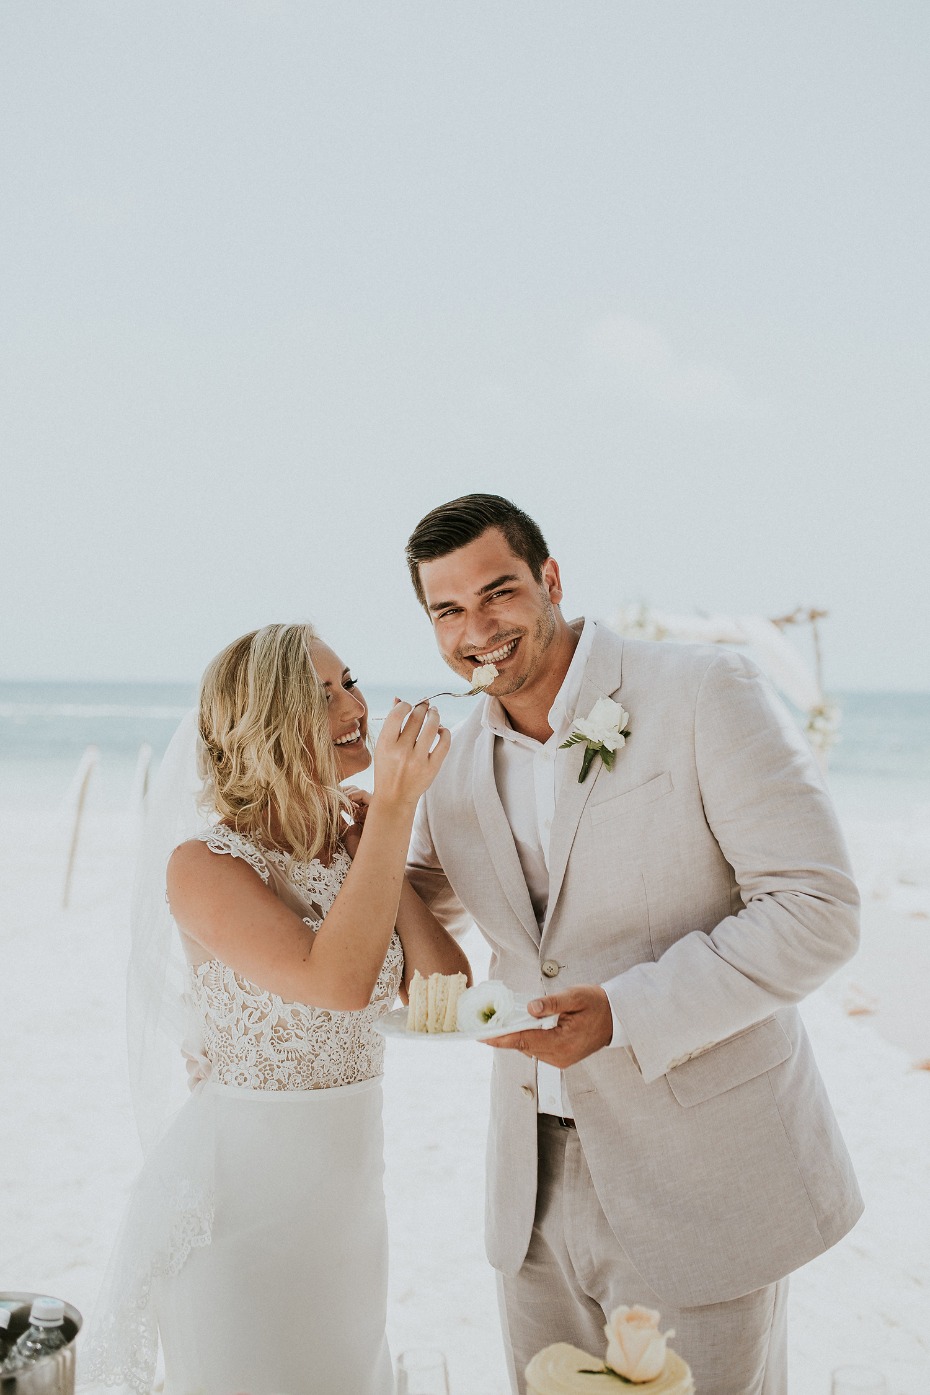 Intimate beach wedding in Mexico